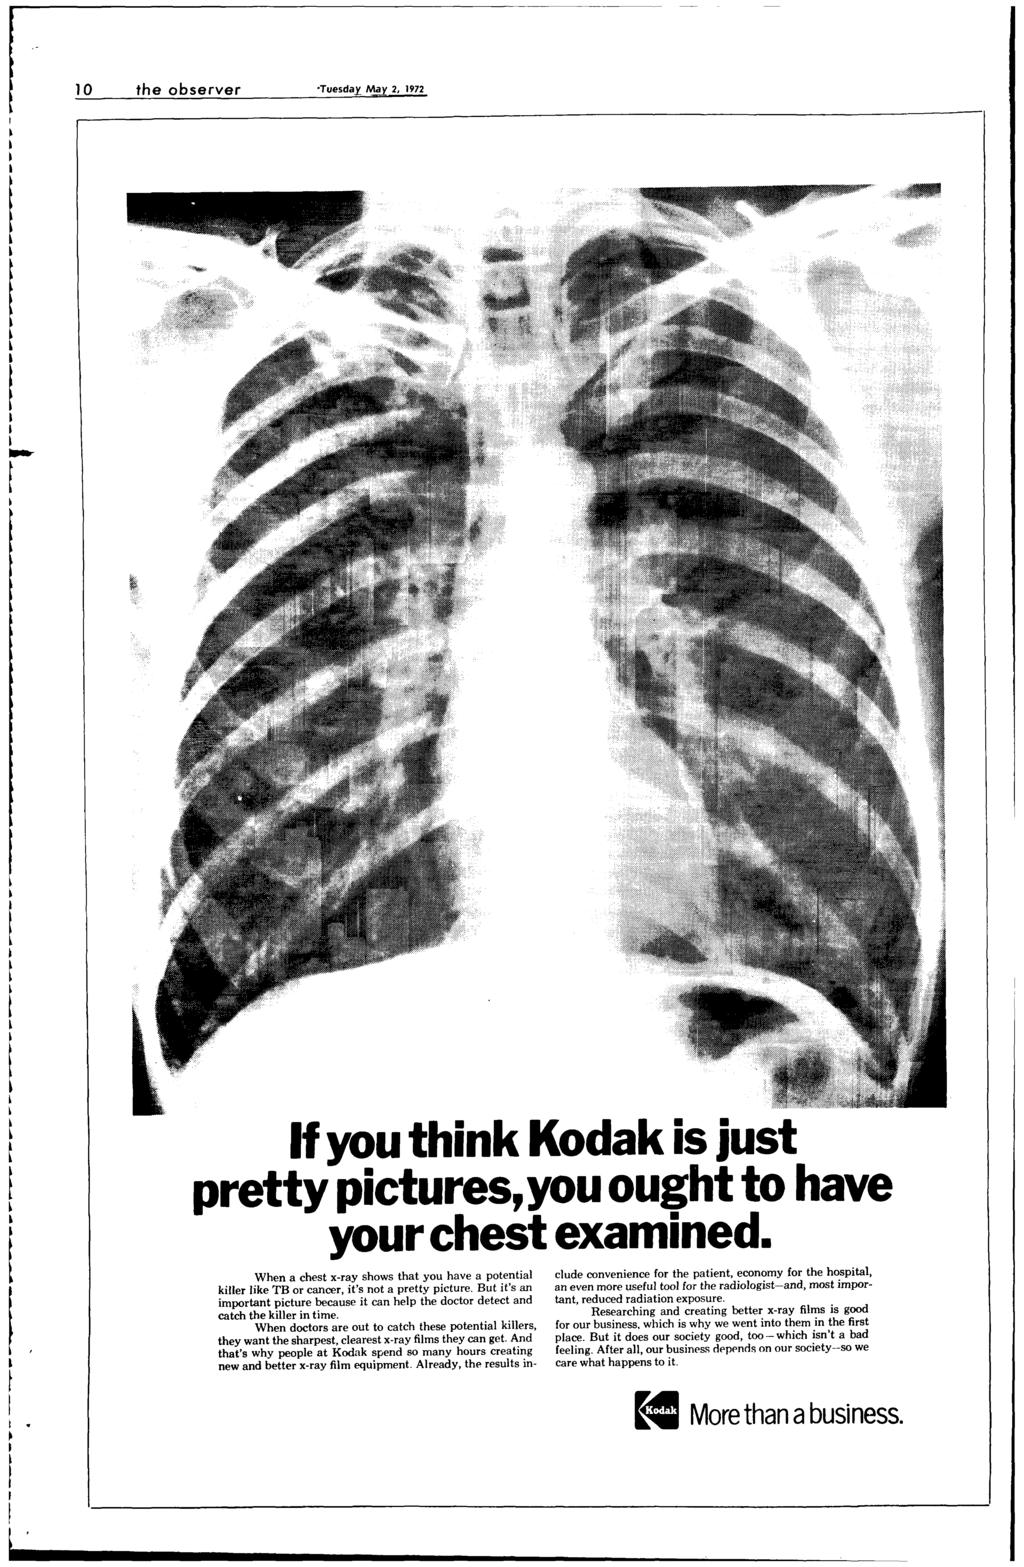 10 the observer Tuesday May 2, 1972 If you think Kodak is just pretty pictures, you ought to have your chest examined.